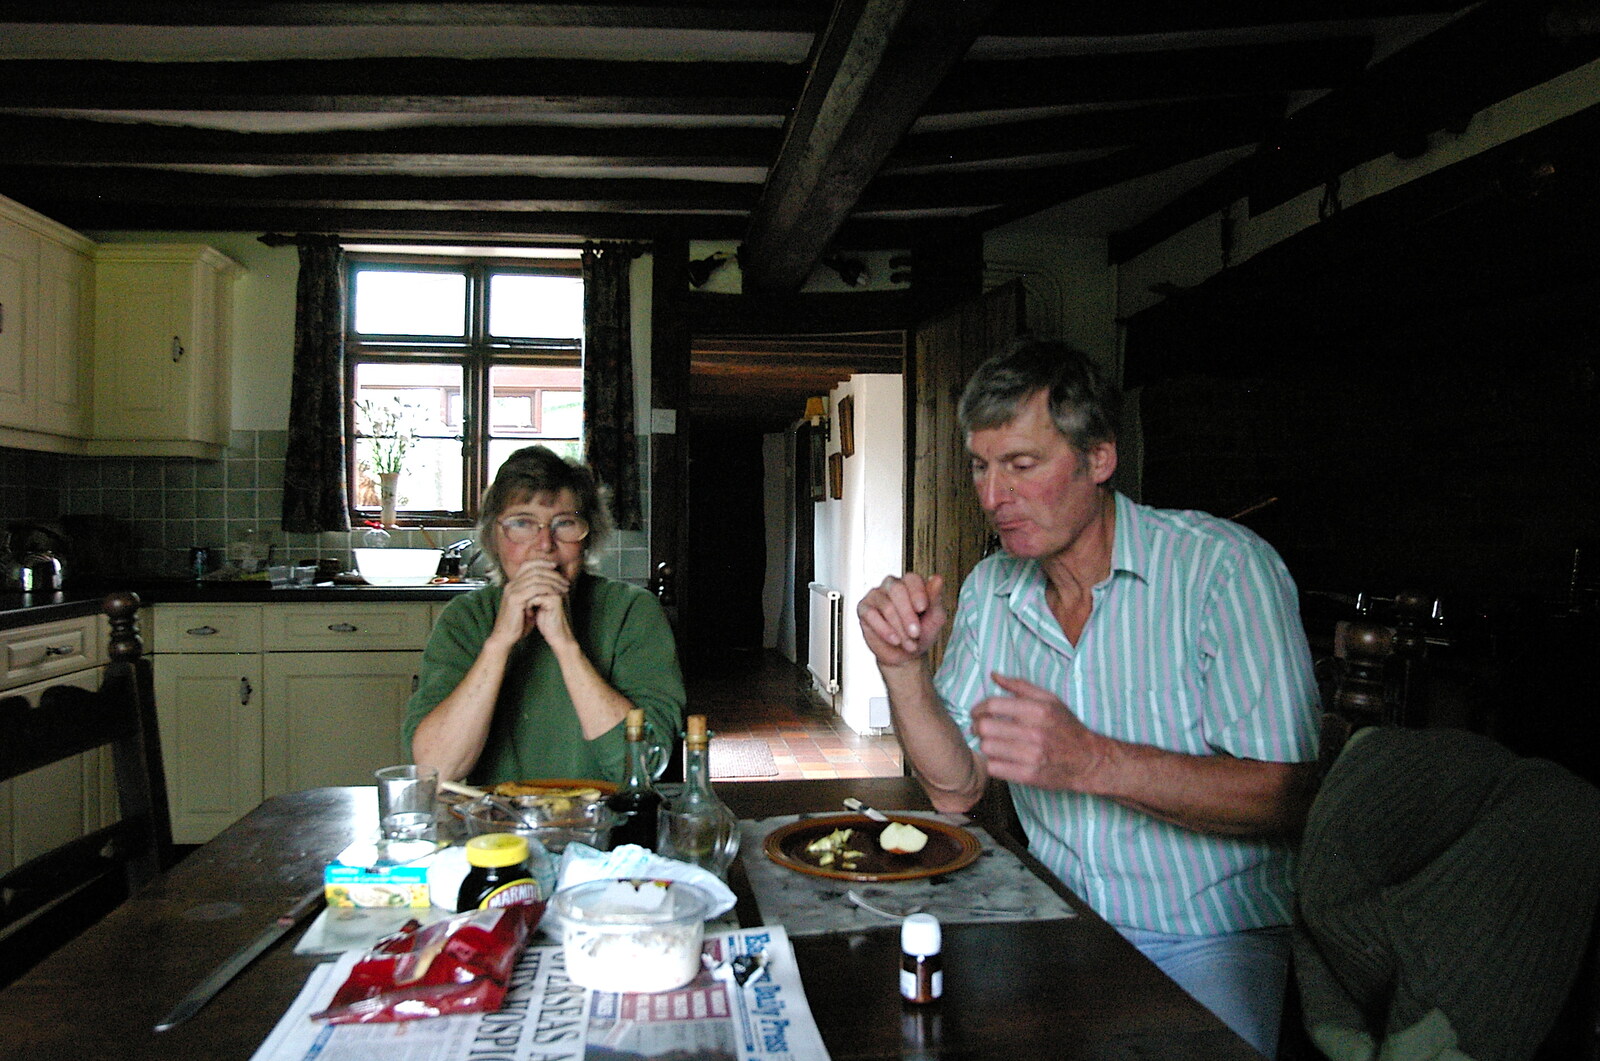 A spot of lunch from The BBS, and the Big Skies of East Anglia, Diss and Hunston, Norfolk and Suffolk - 6th August 2005